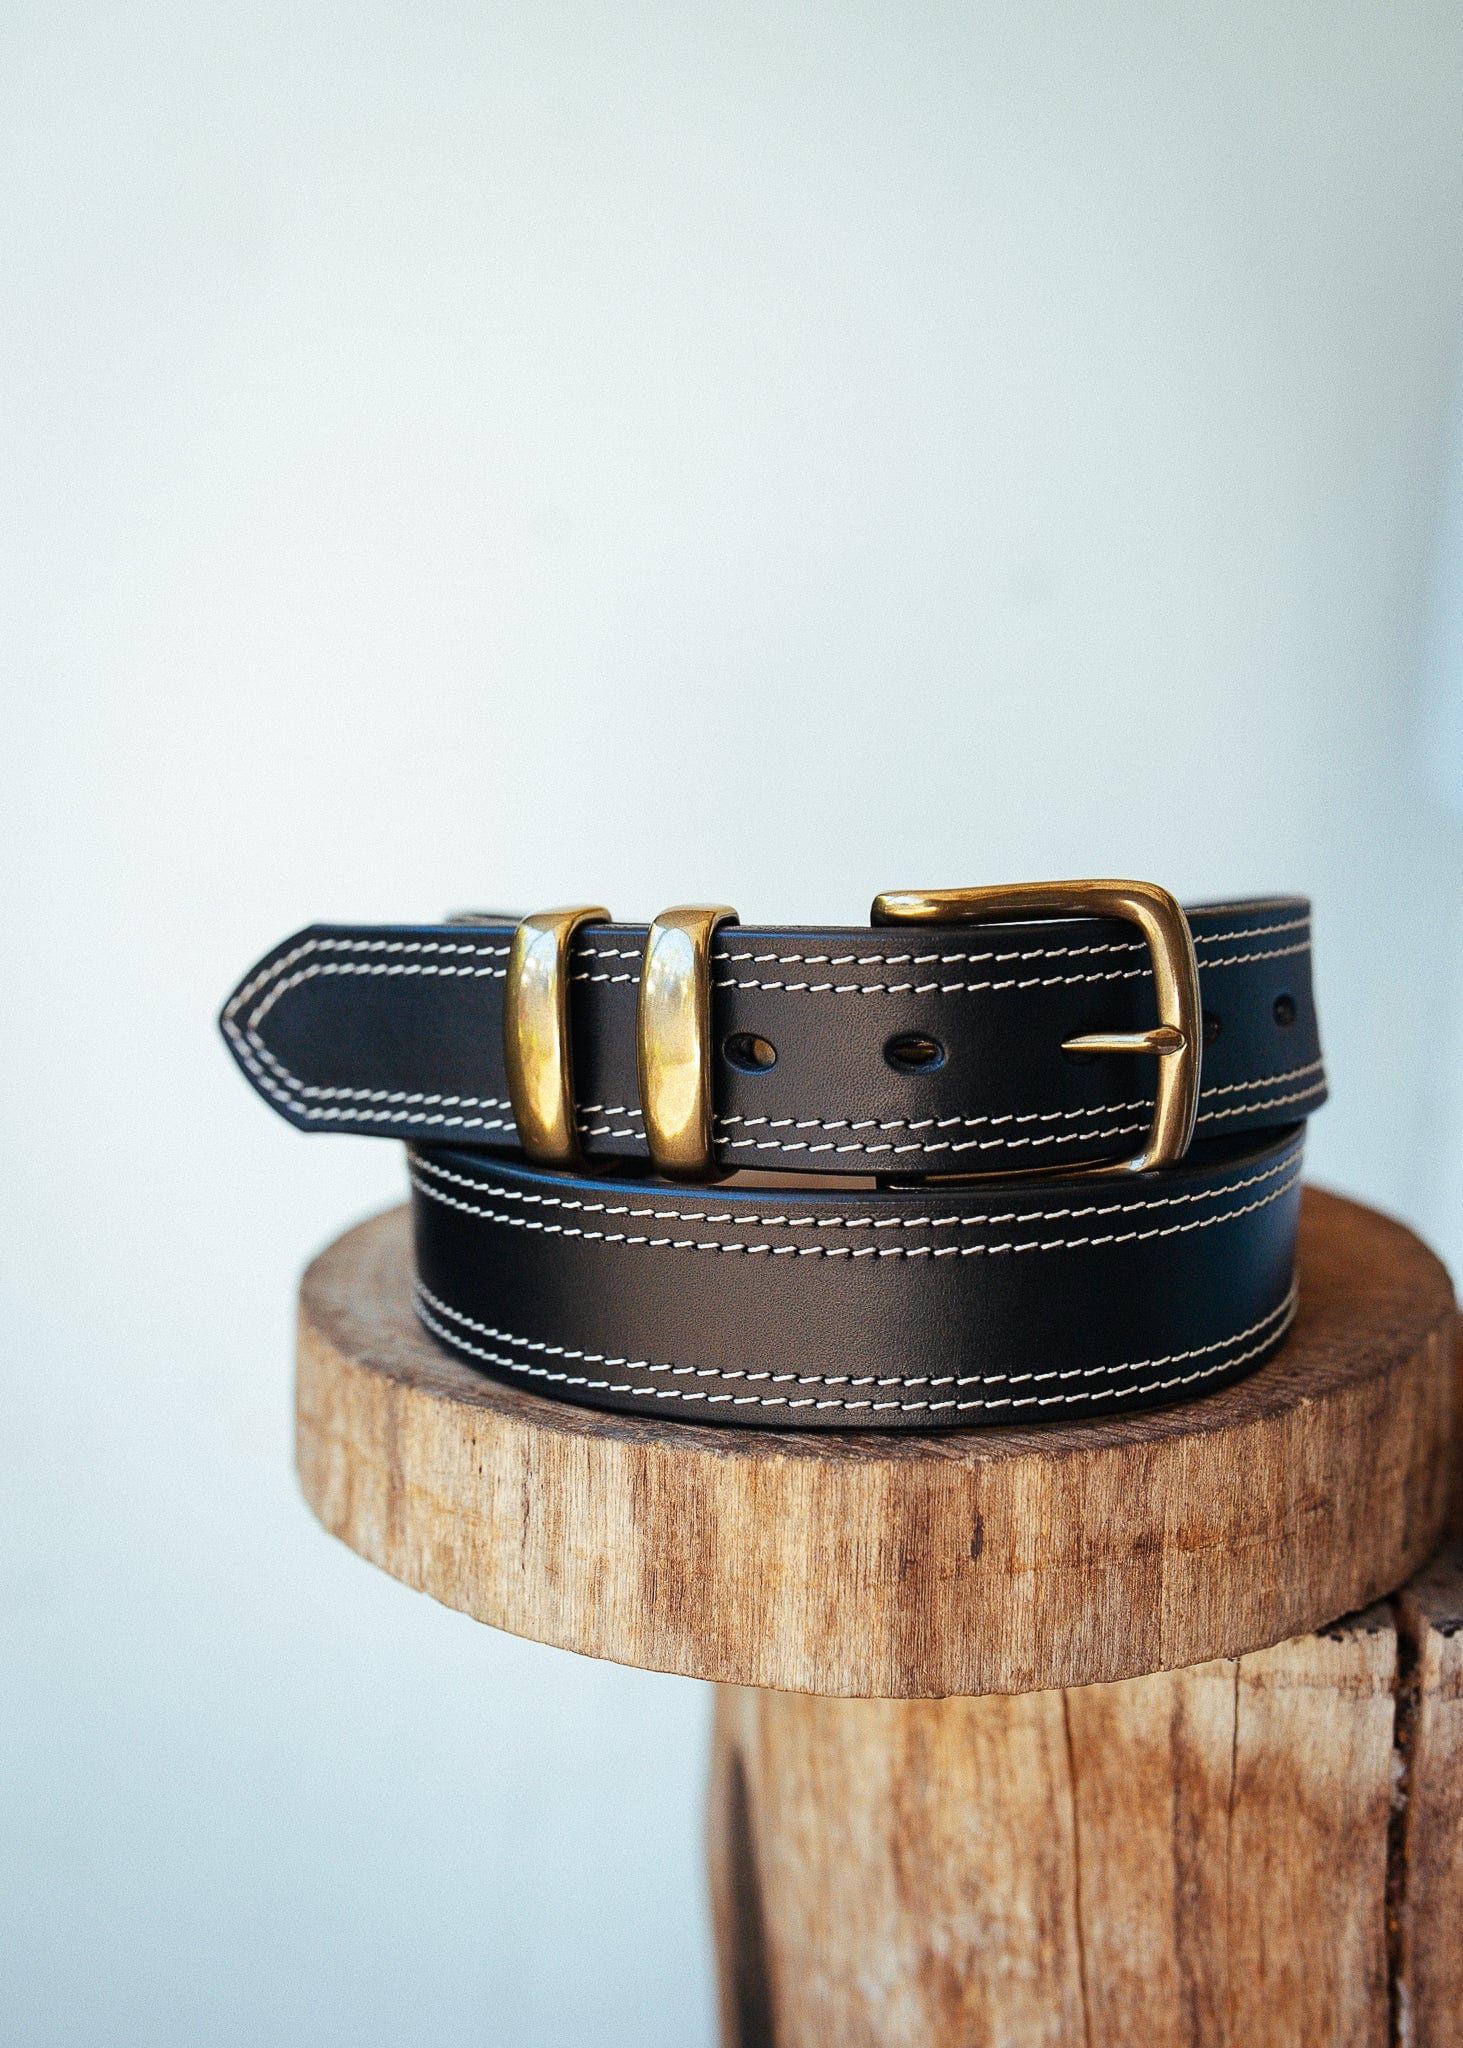 Handmade leather belt with anchor buckle 4cm wide